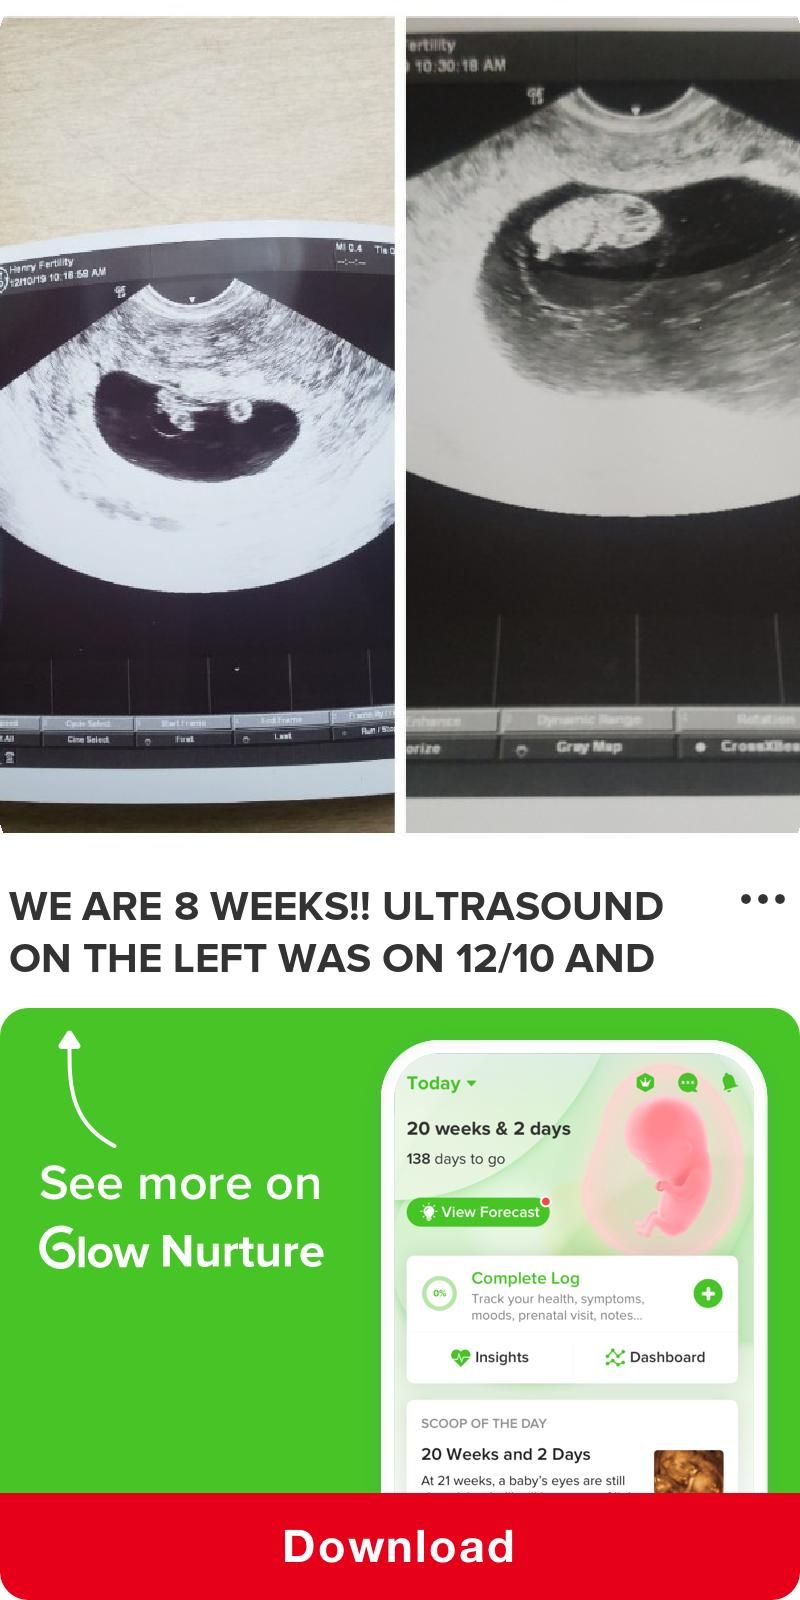 We are 8 weeks,, Ultrasound on the left was on